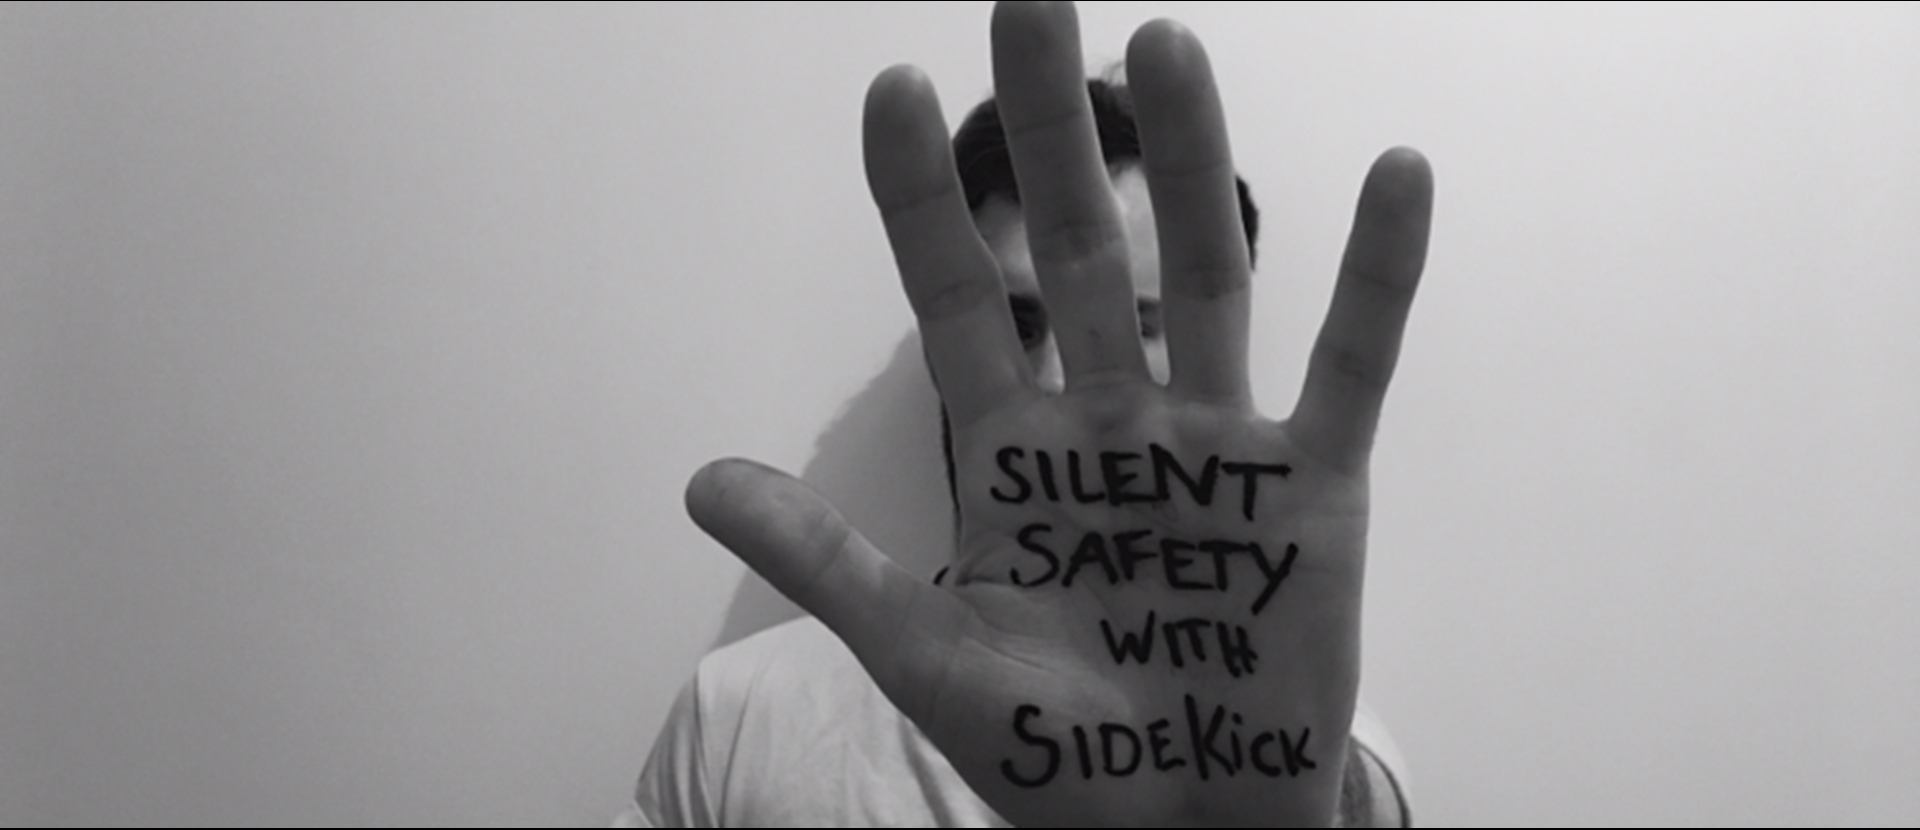 A person showing the palm of their hand with the words 'Silent safety with sidekick' written on it.